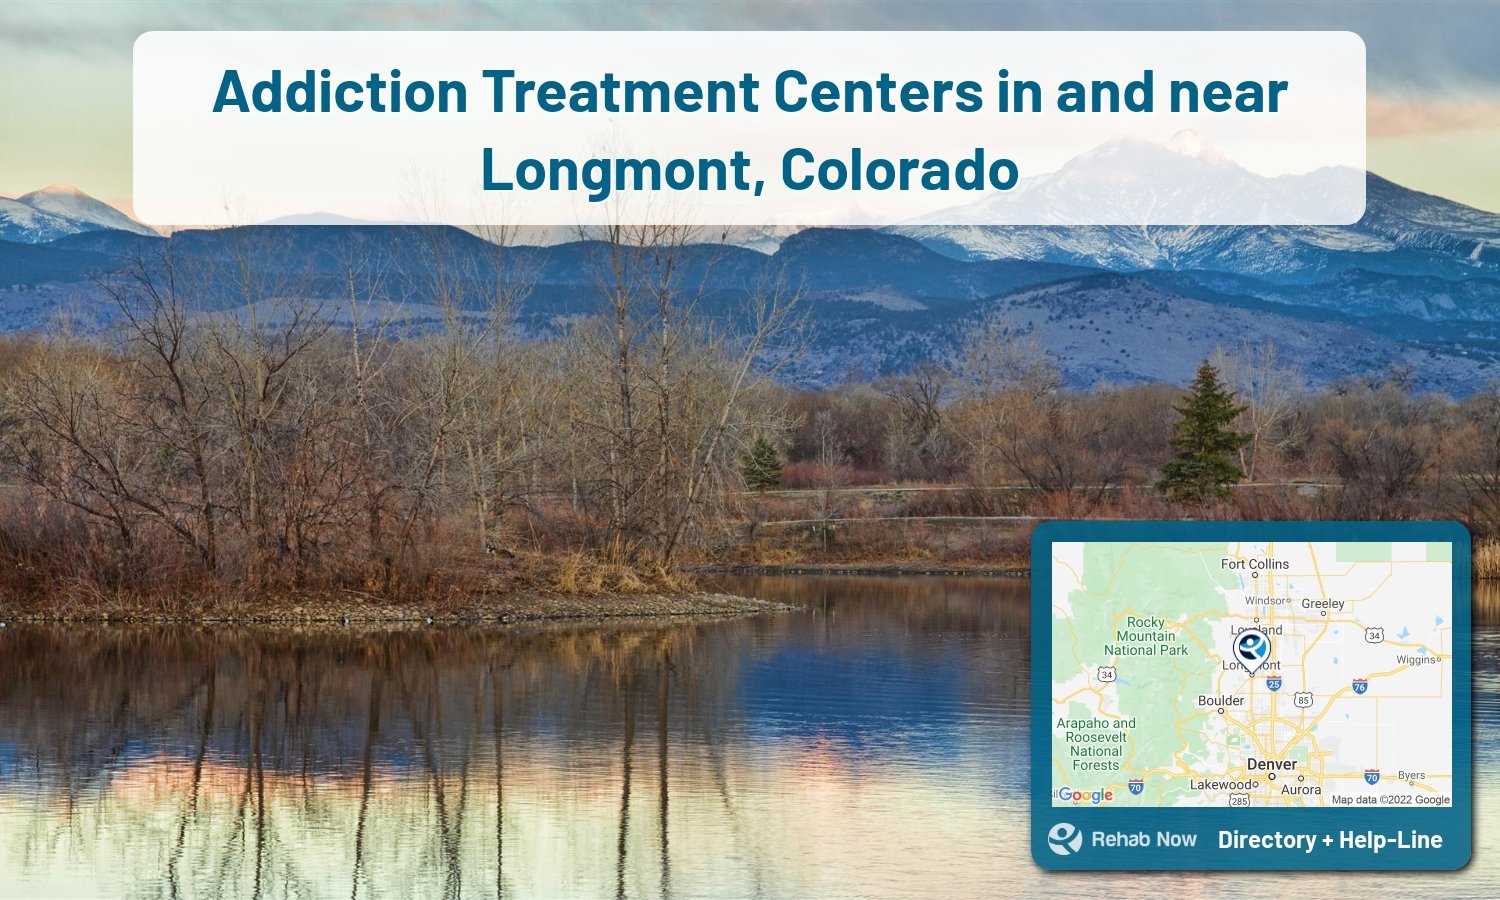 Longmont, CO Treatment Centers. Find drug rehab in Longmont, Colorado, or detox and treatment programs. Get the right help now!